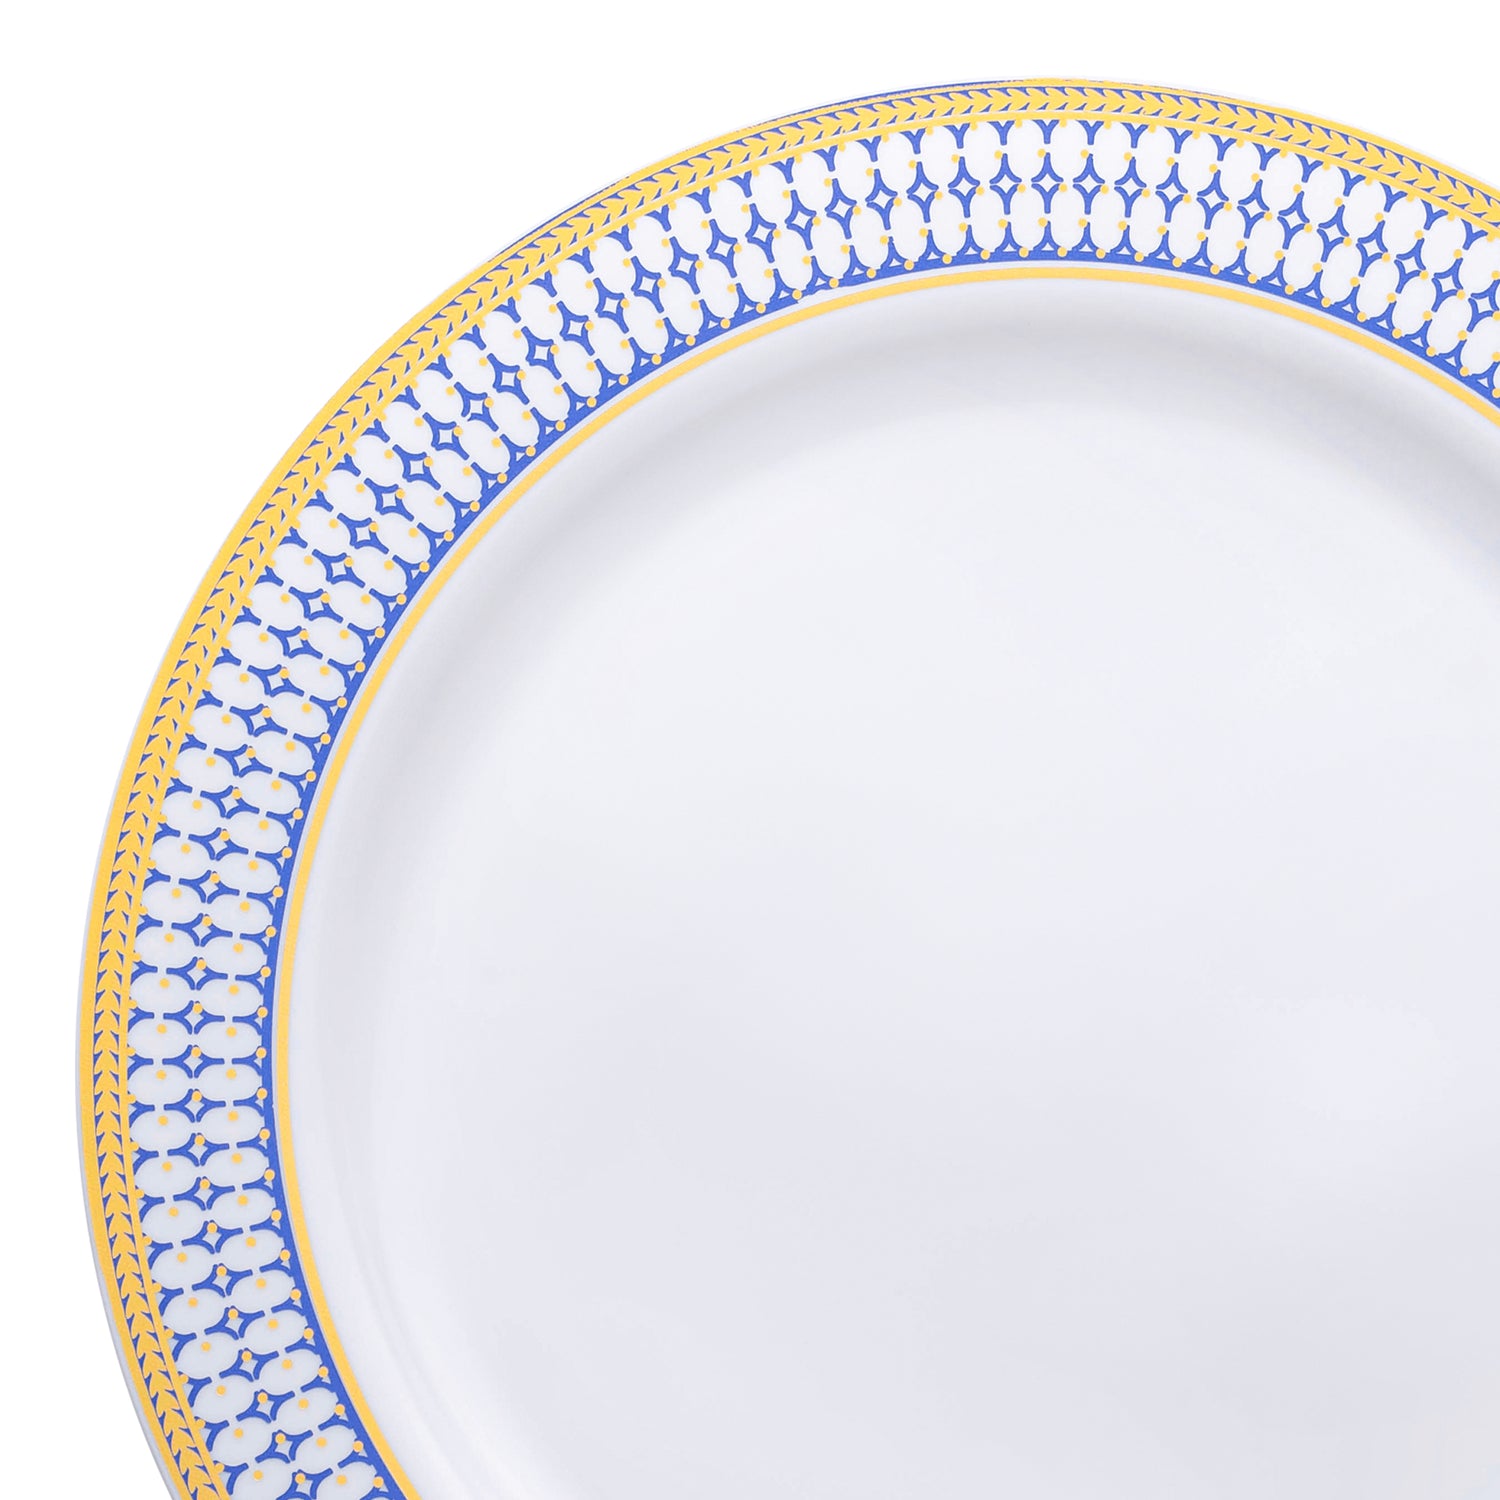 White with Blue and Gold Chord Rim Plastic Appetizer/Salad Plates (7.5") | The Kaya Collection